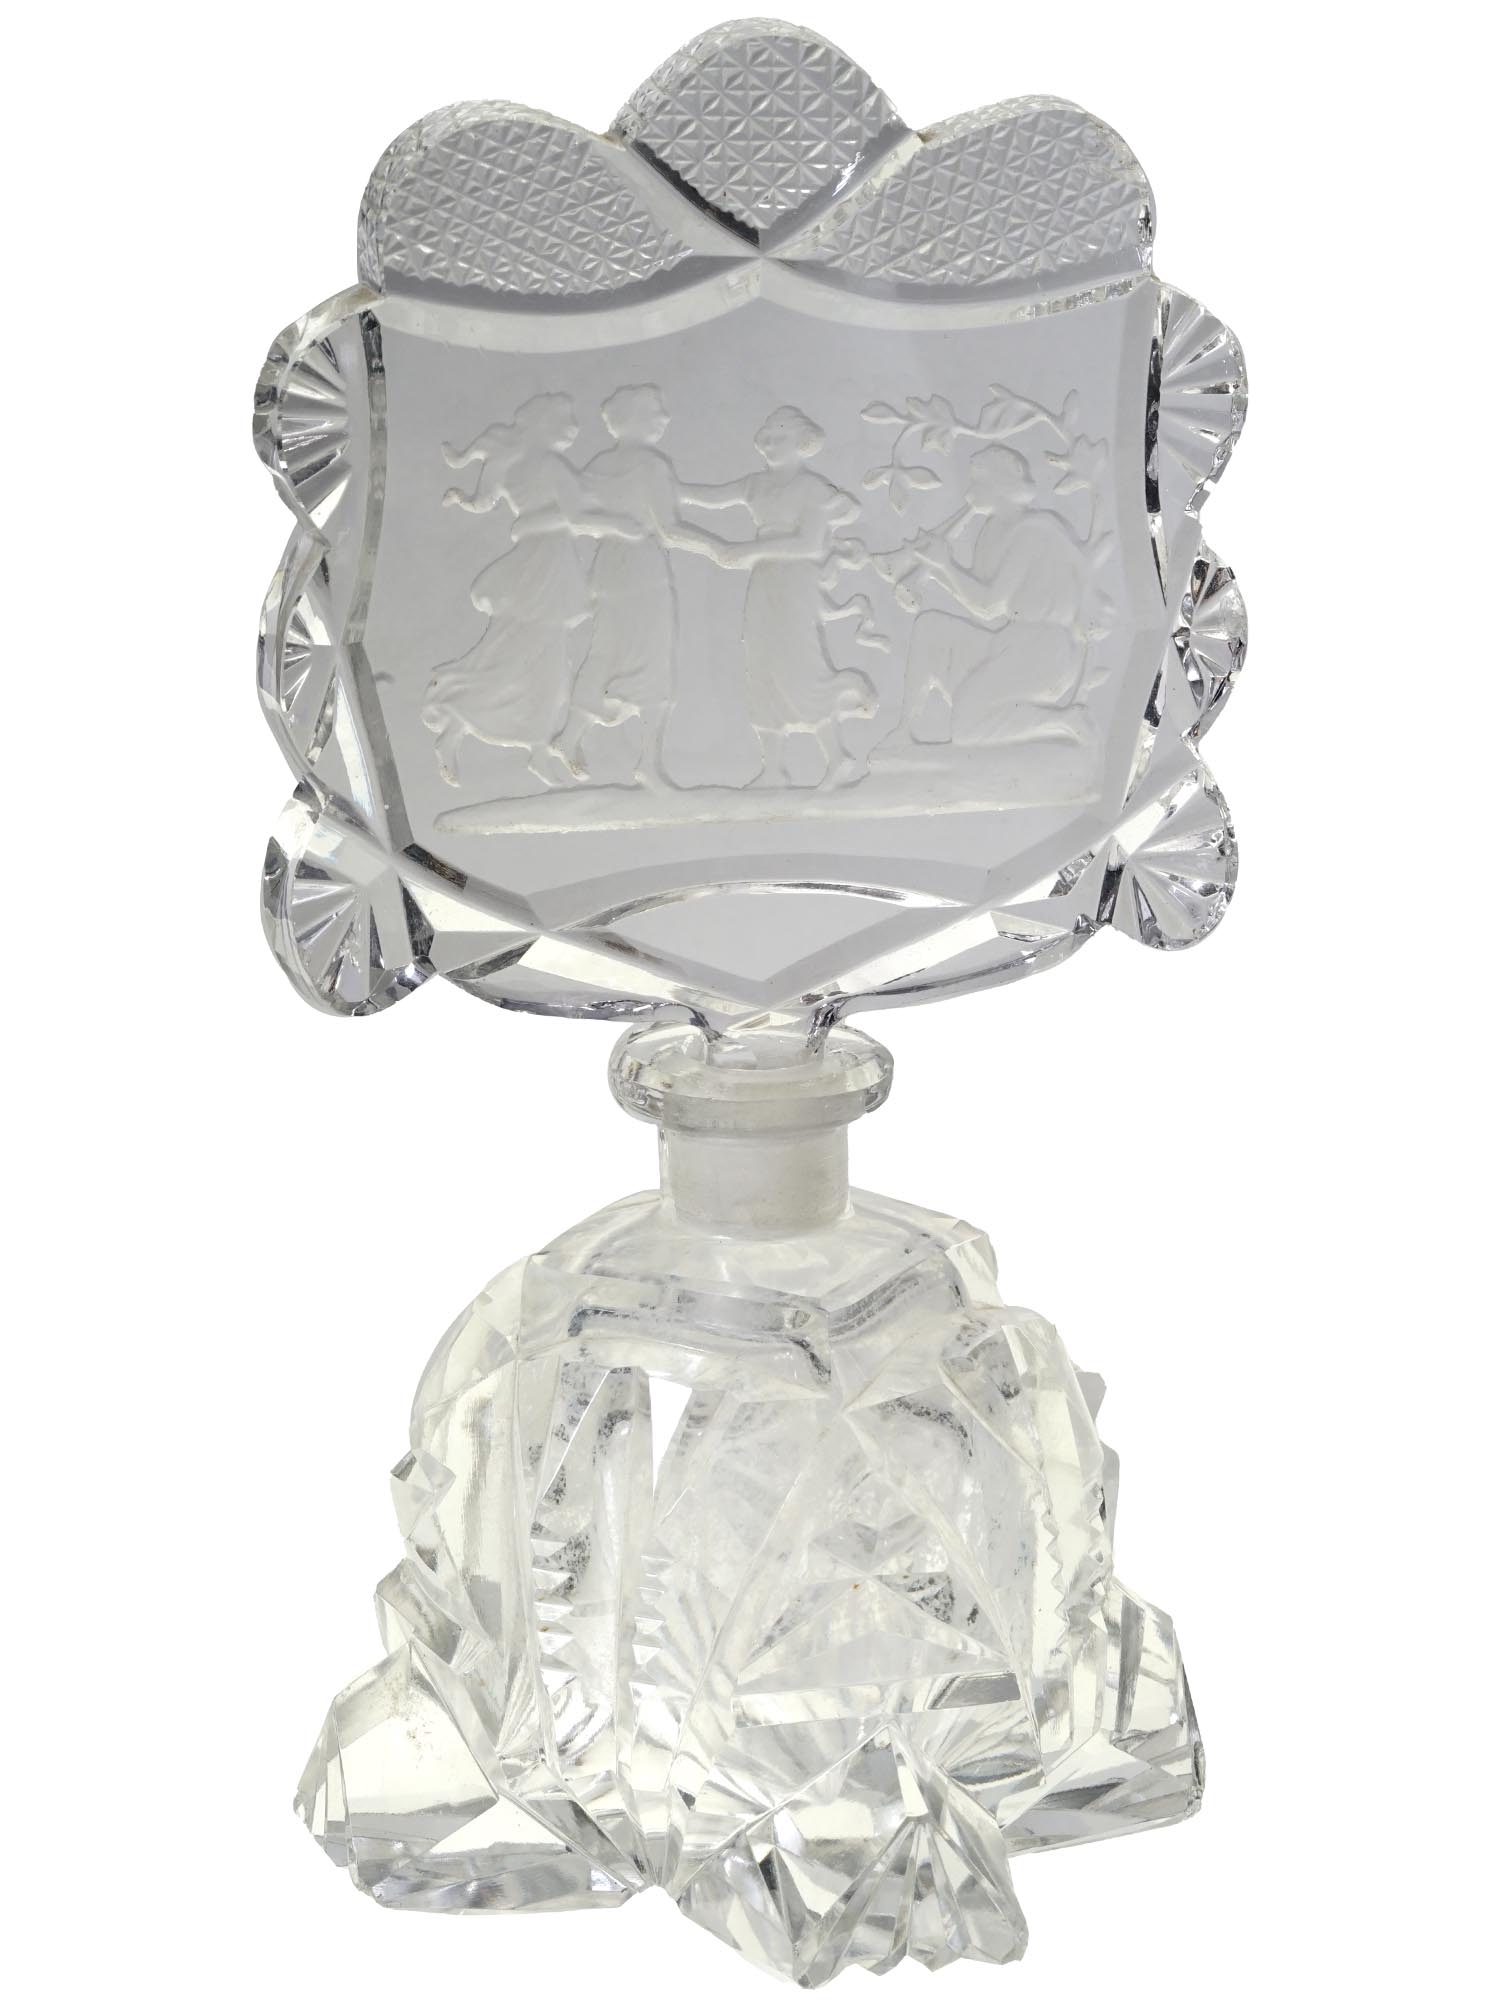 VINTAGE CRYSTAL CUT PERFUME BOTTLE WITH A LID PIC-0